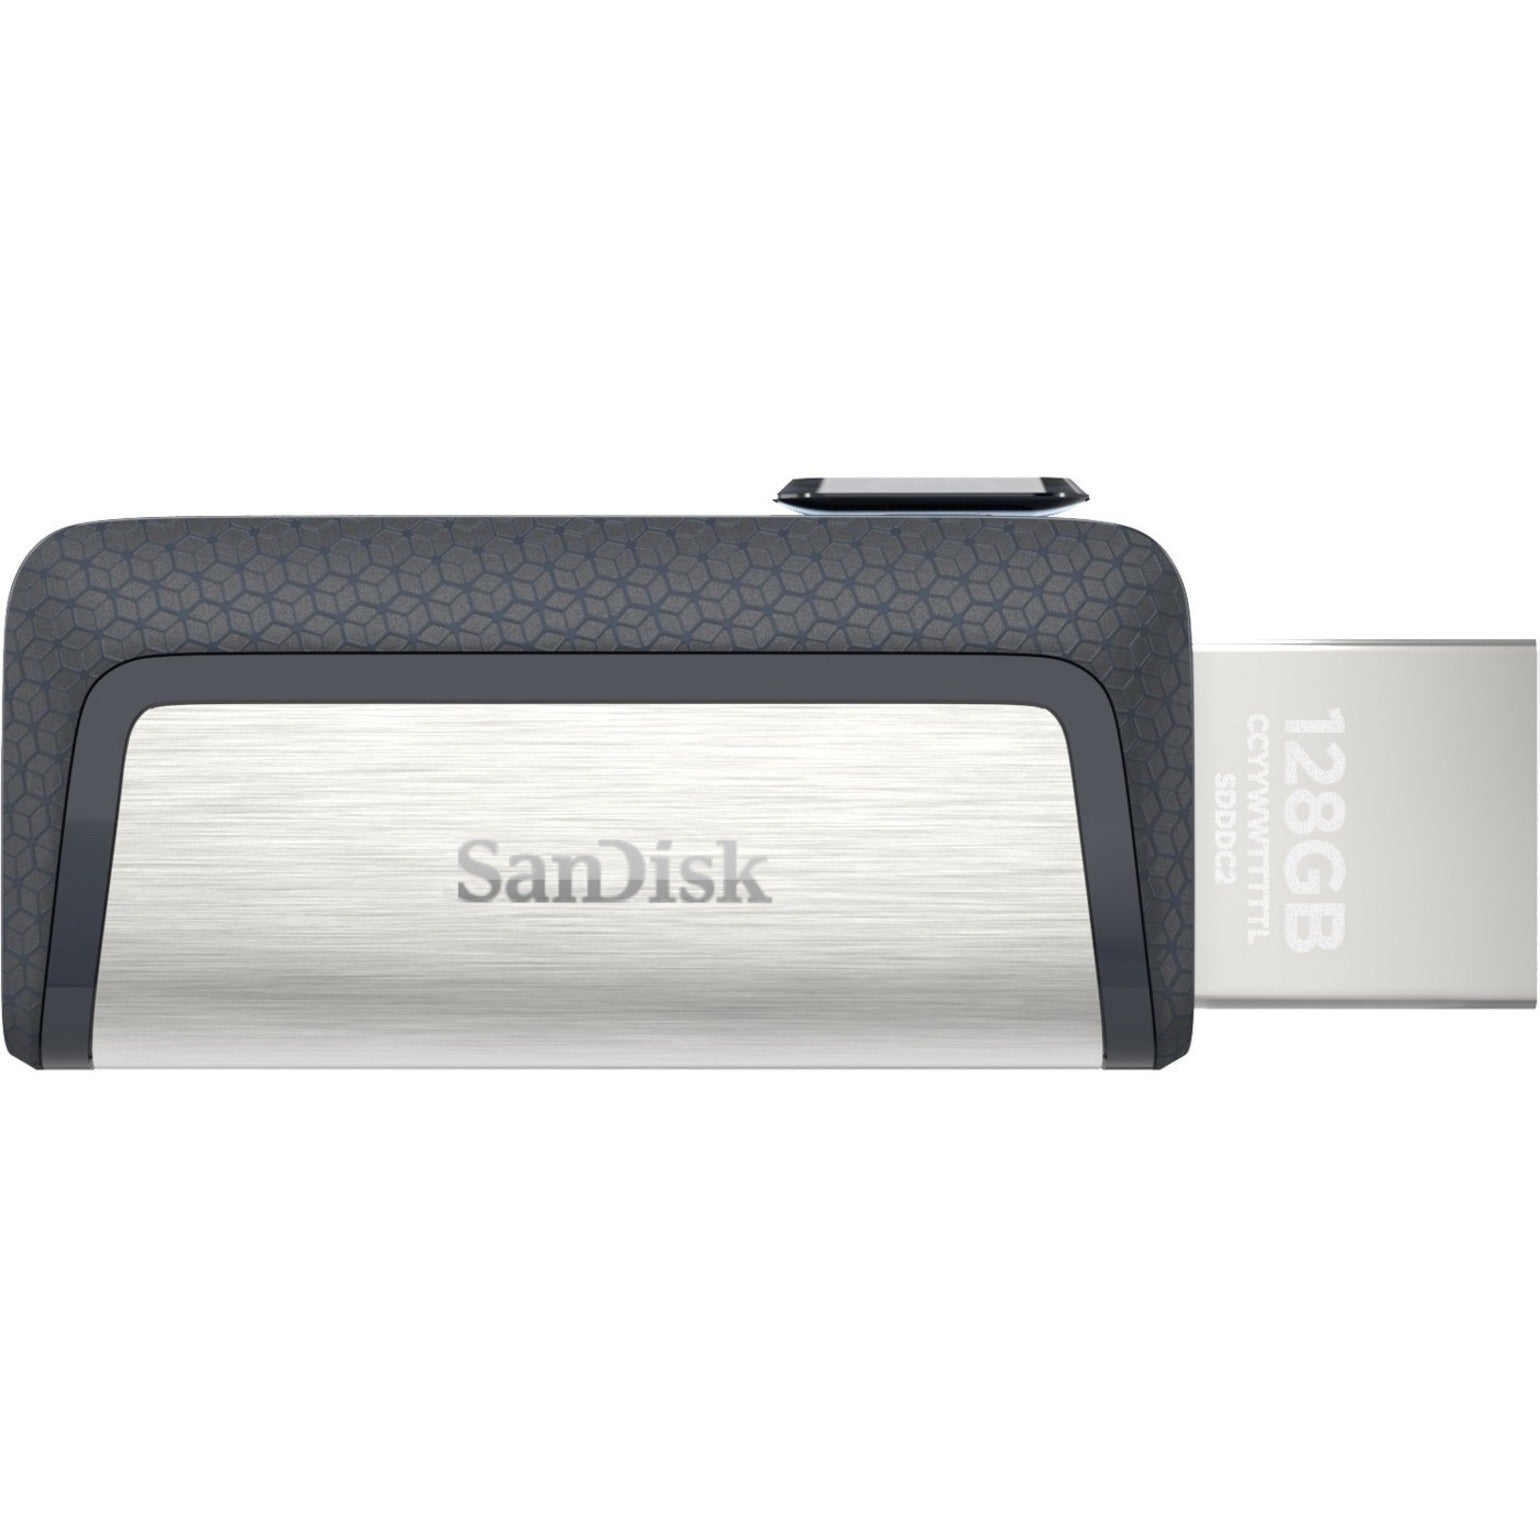 SanDisk SDDDC2-128G-A46 Ultra Dual Drive USB TYPE-C - 128GB, High-Speed Data Transfer and Easy File Management